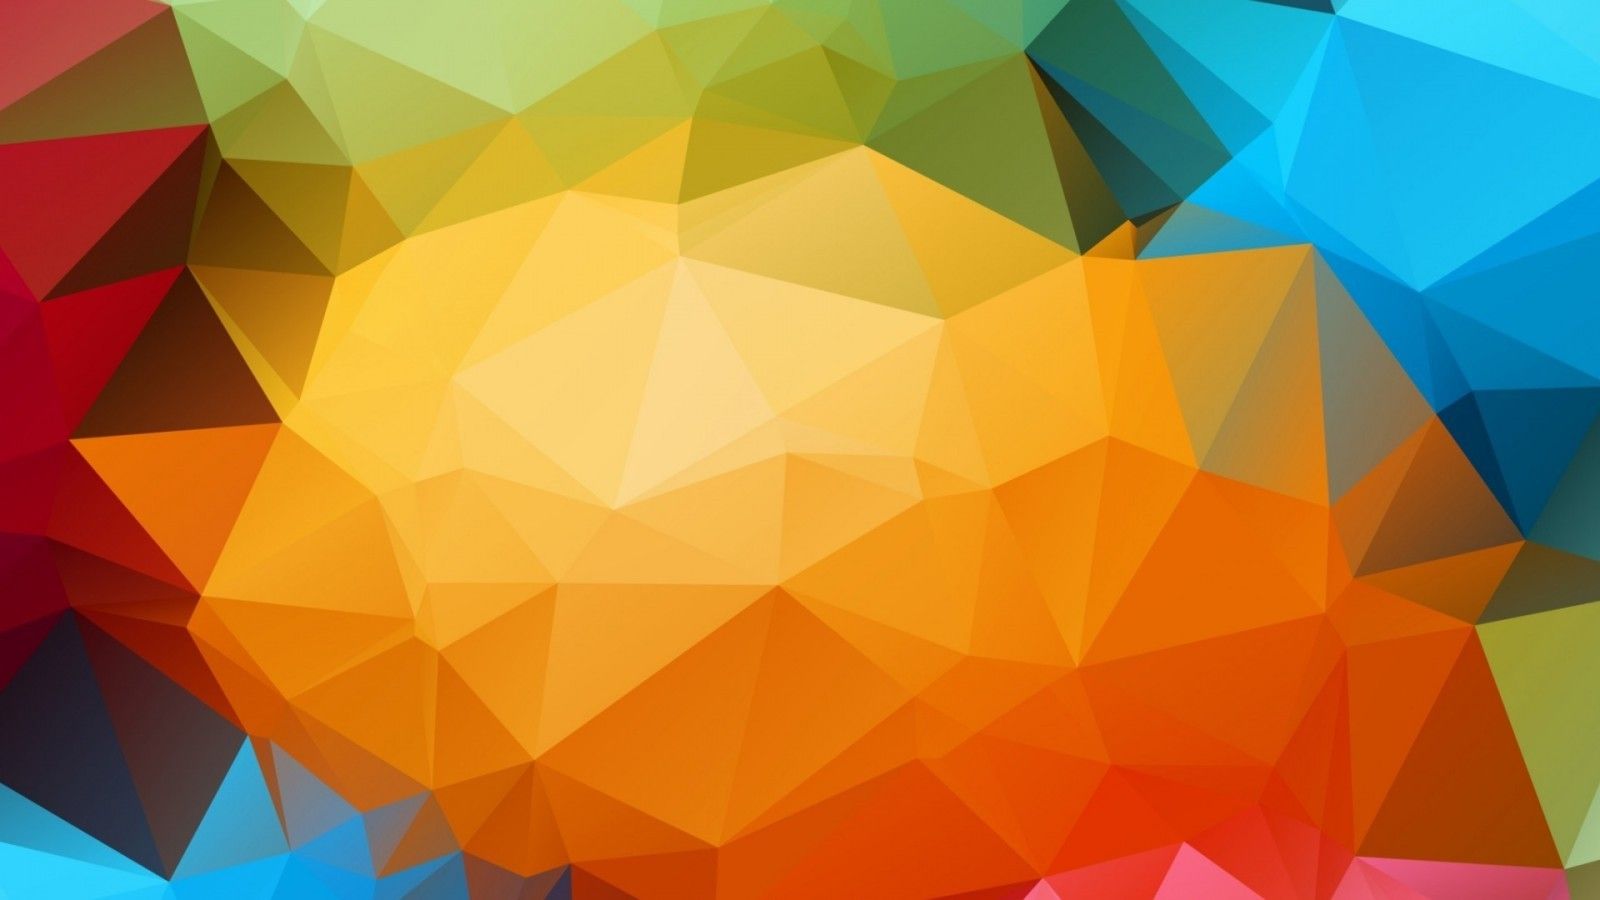 Download 1600x900 Colorful Triangles, Shapes, Low Poly Wallpaper